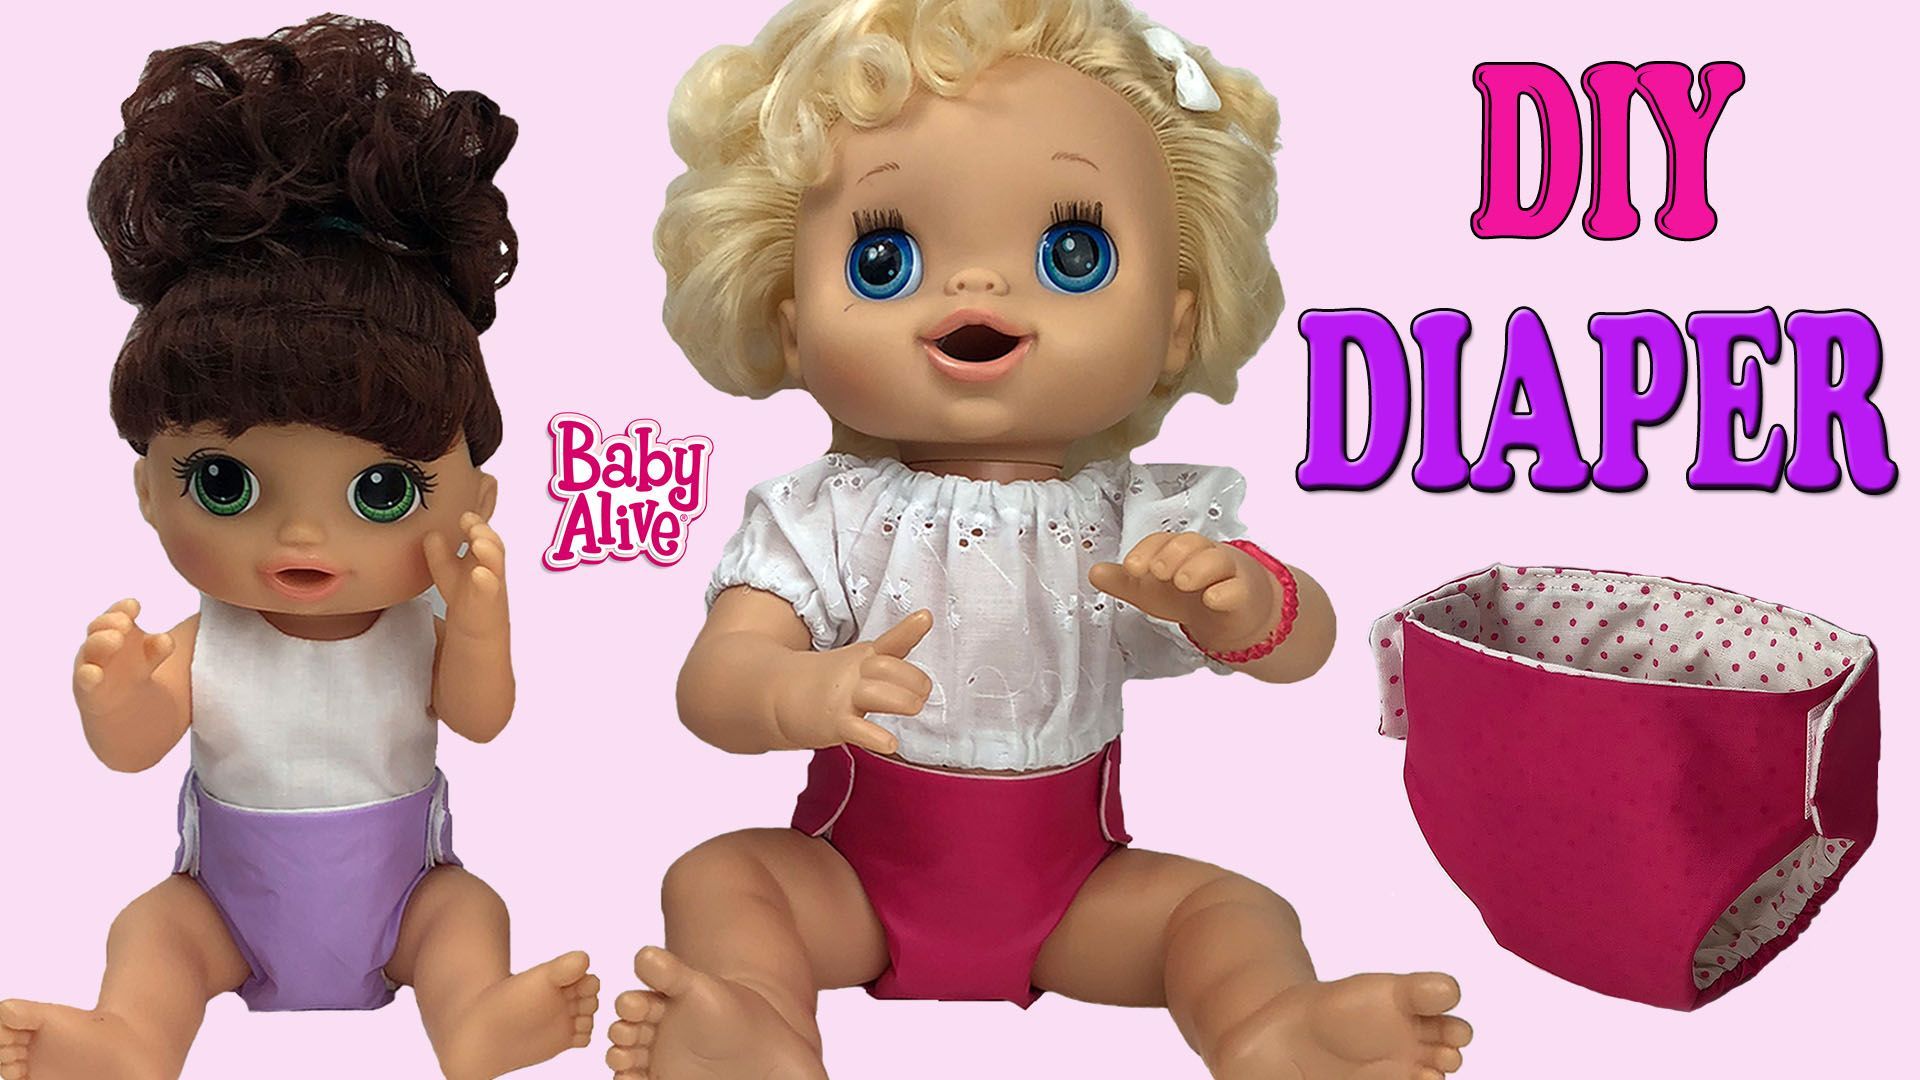 How to make Diapers for Baby Alive Doll Reusable Free Pattern available in 2 sizes 12 inch and 16 inch. Baby alive, Baby alive dolls, Diaper pattern